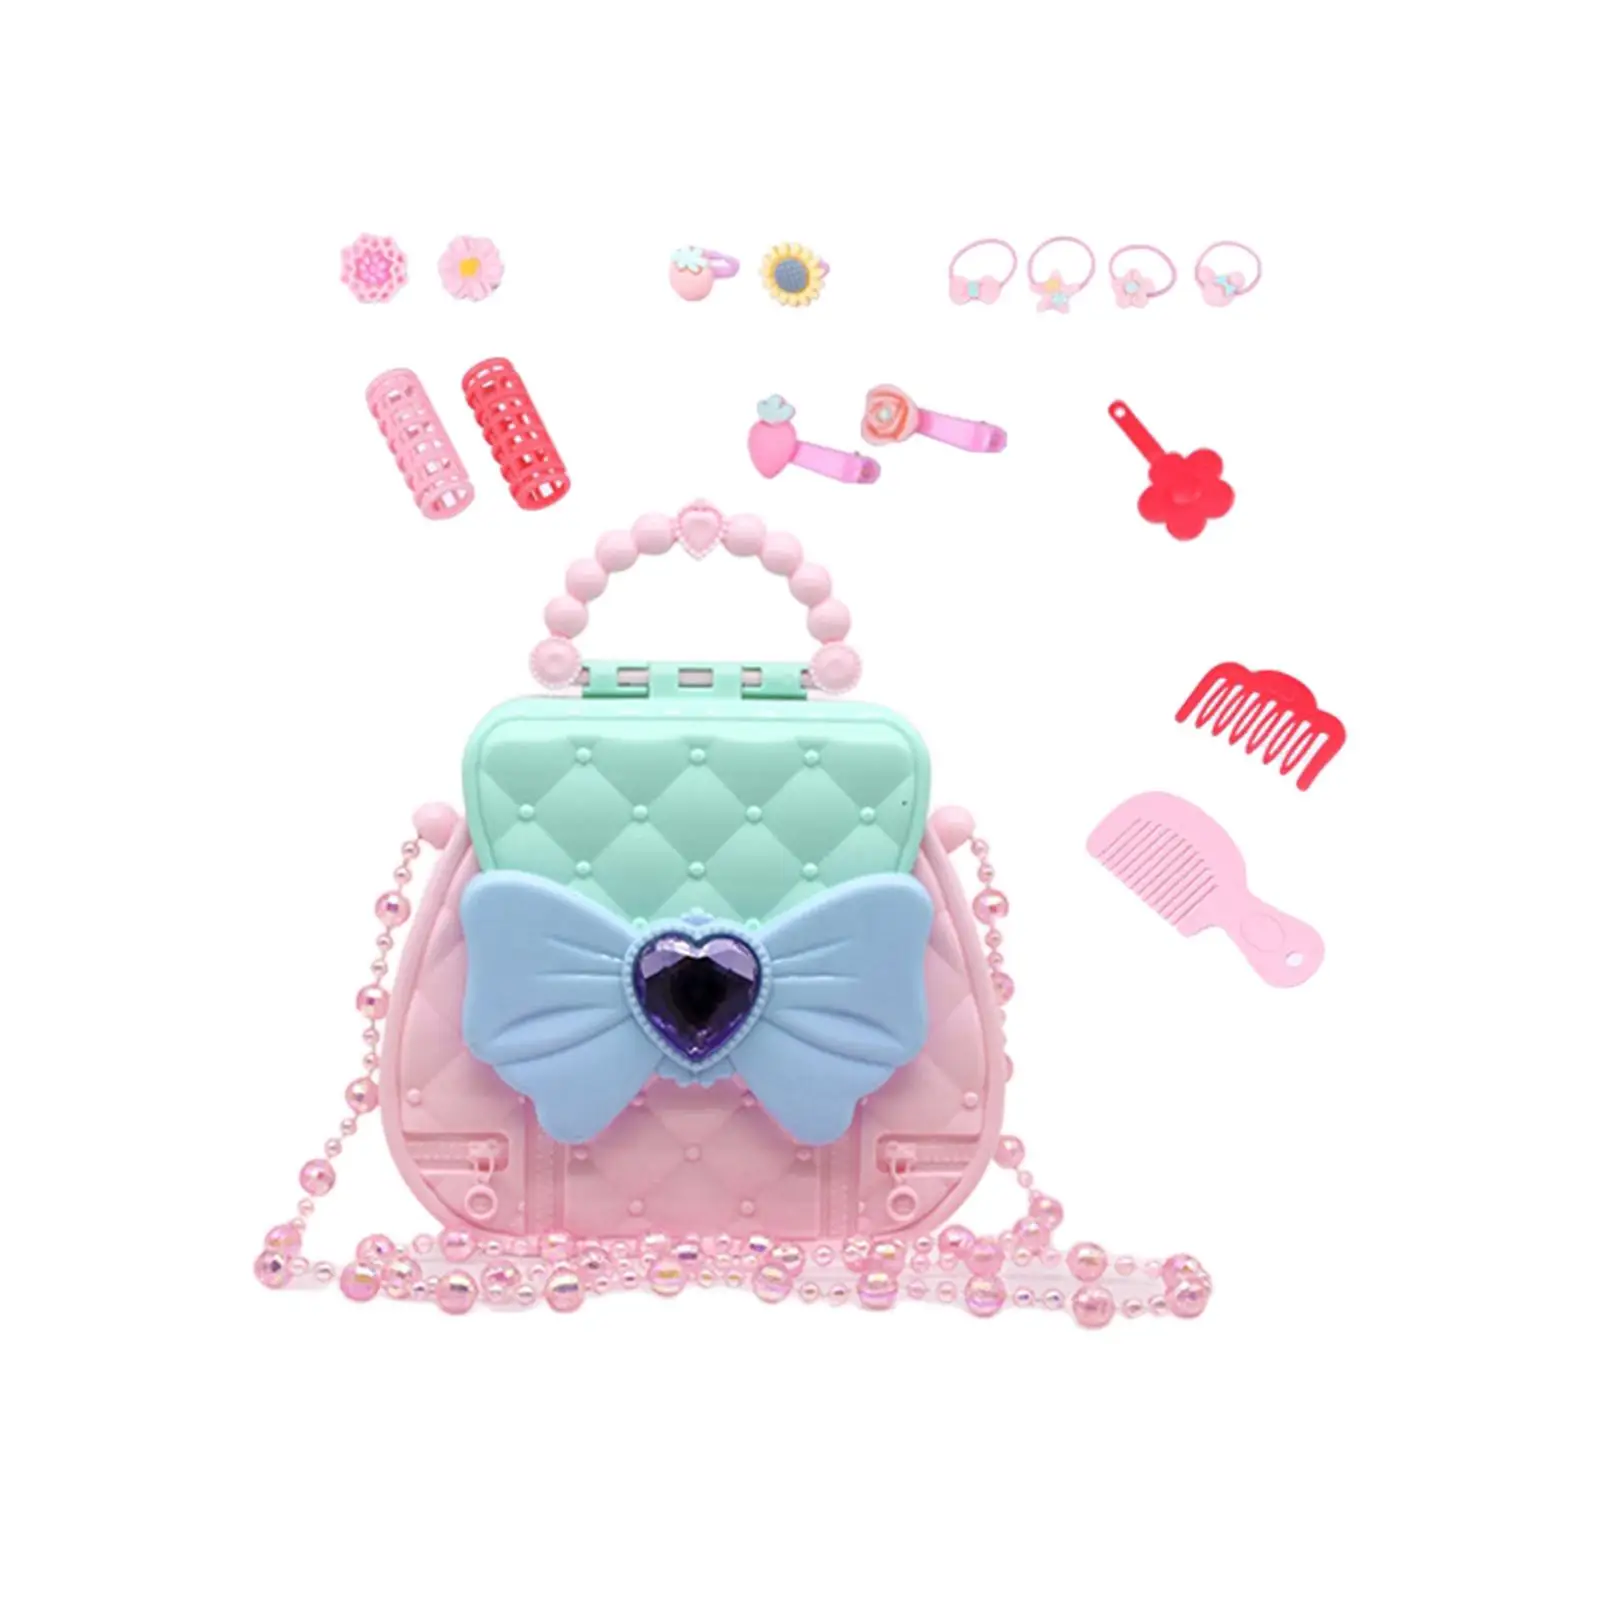 Play Purse Toy for Little Girls Toddlers Purse Playset for Birthday New Year